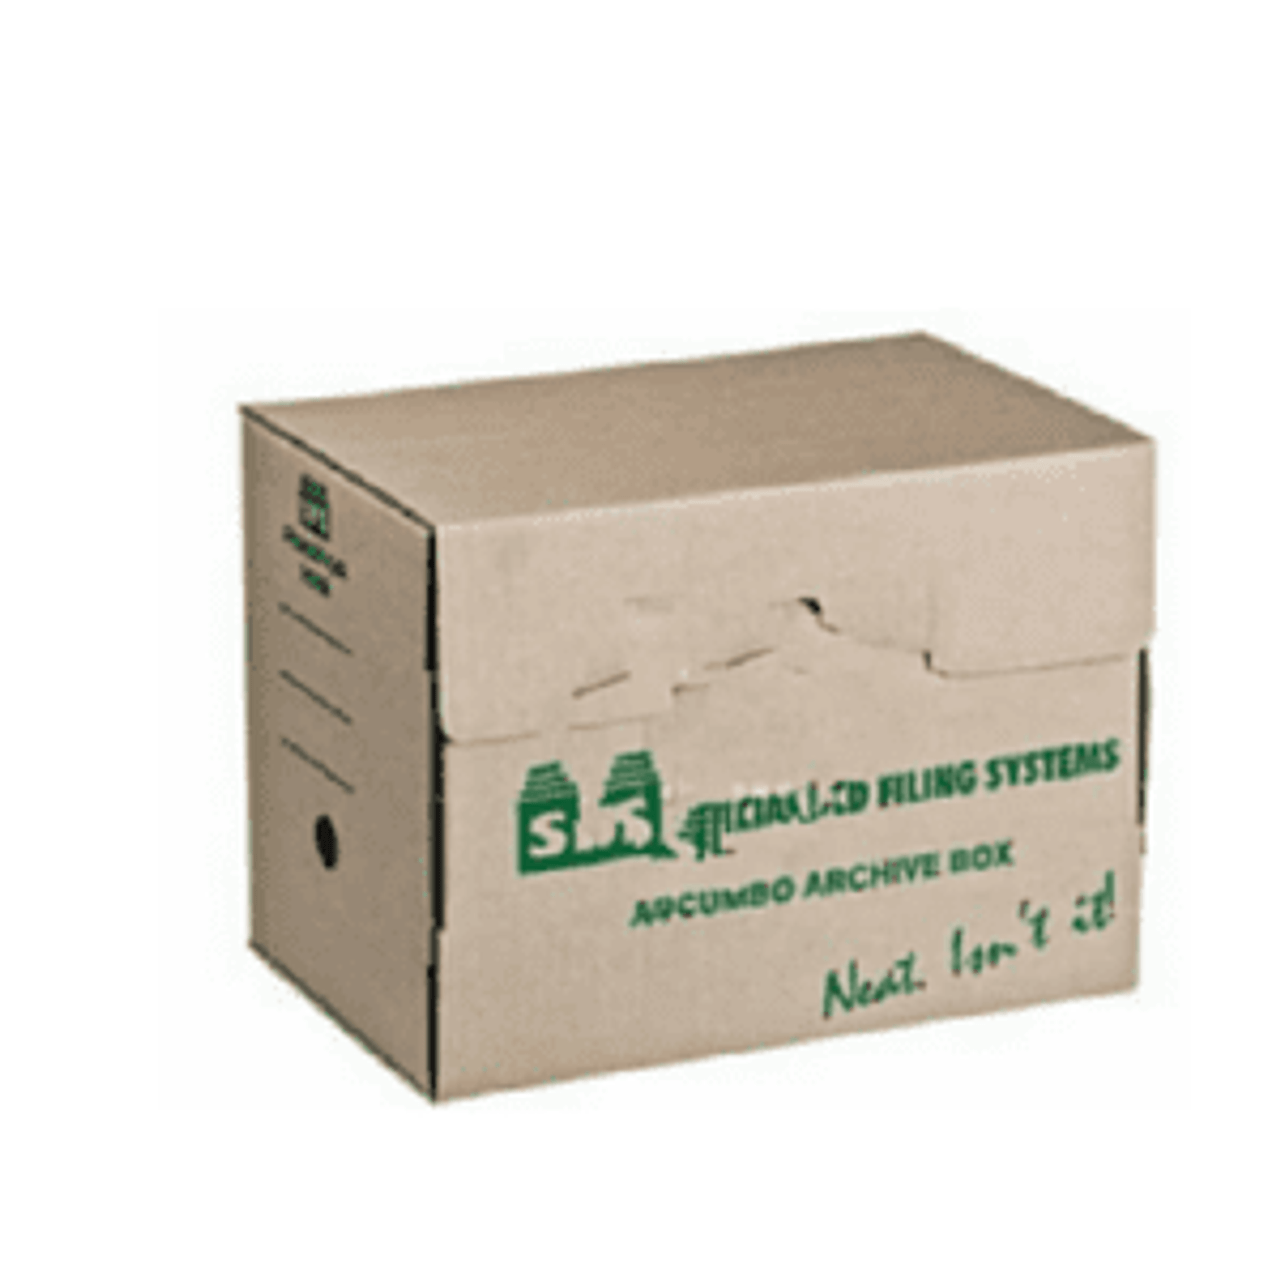 A4 Archive Filing Box PRI, Boxes For Sale - Box Shop Johannesburg, Packaging Store